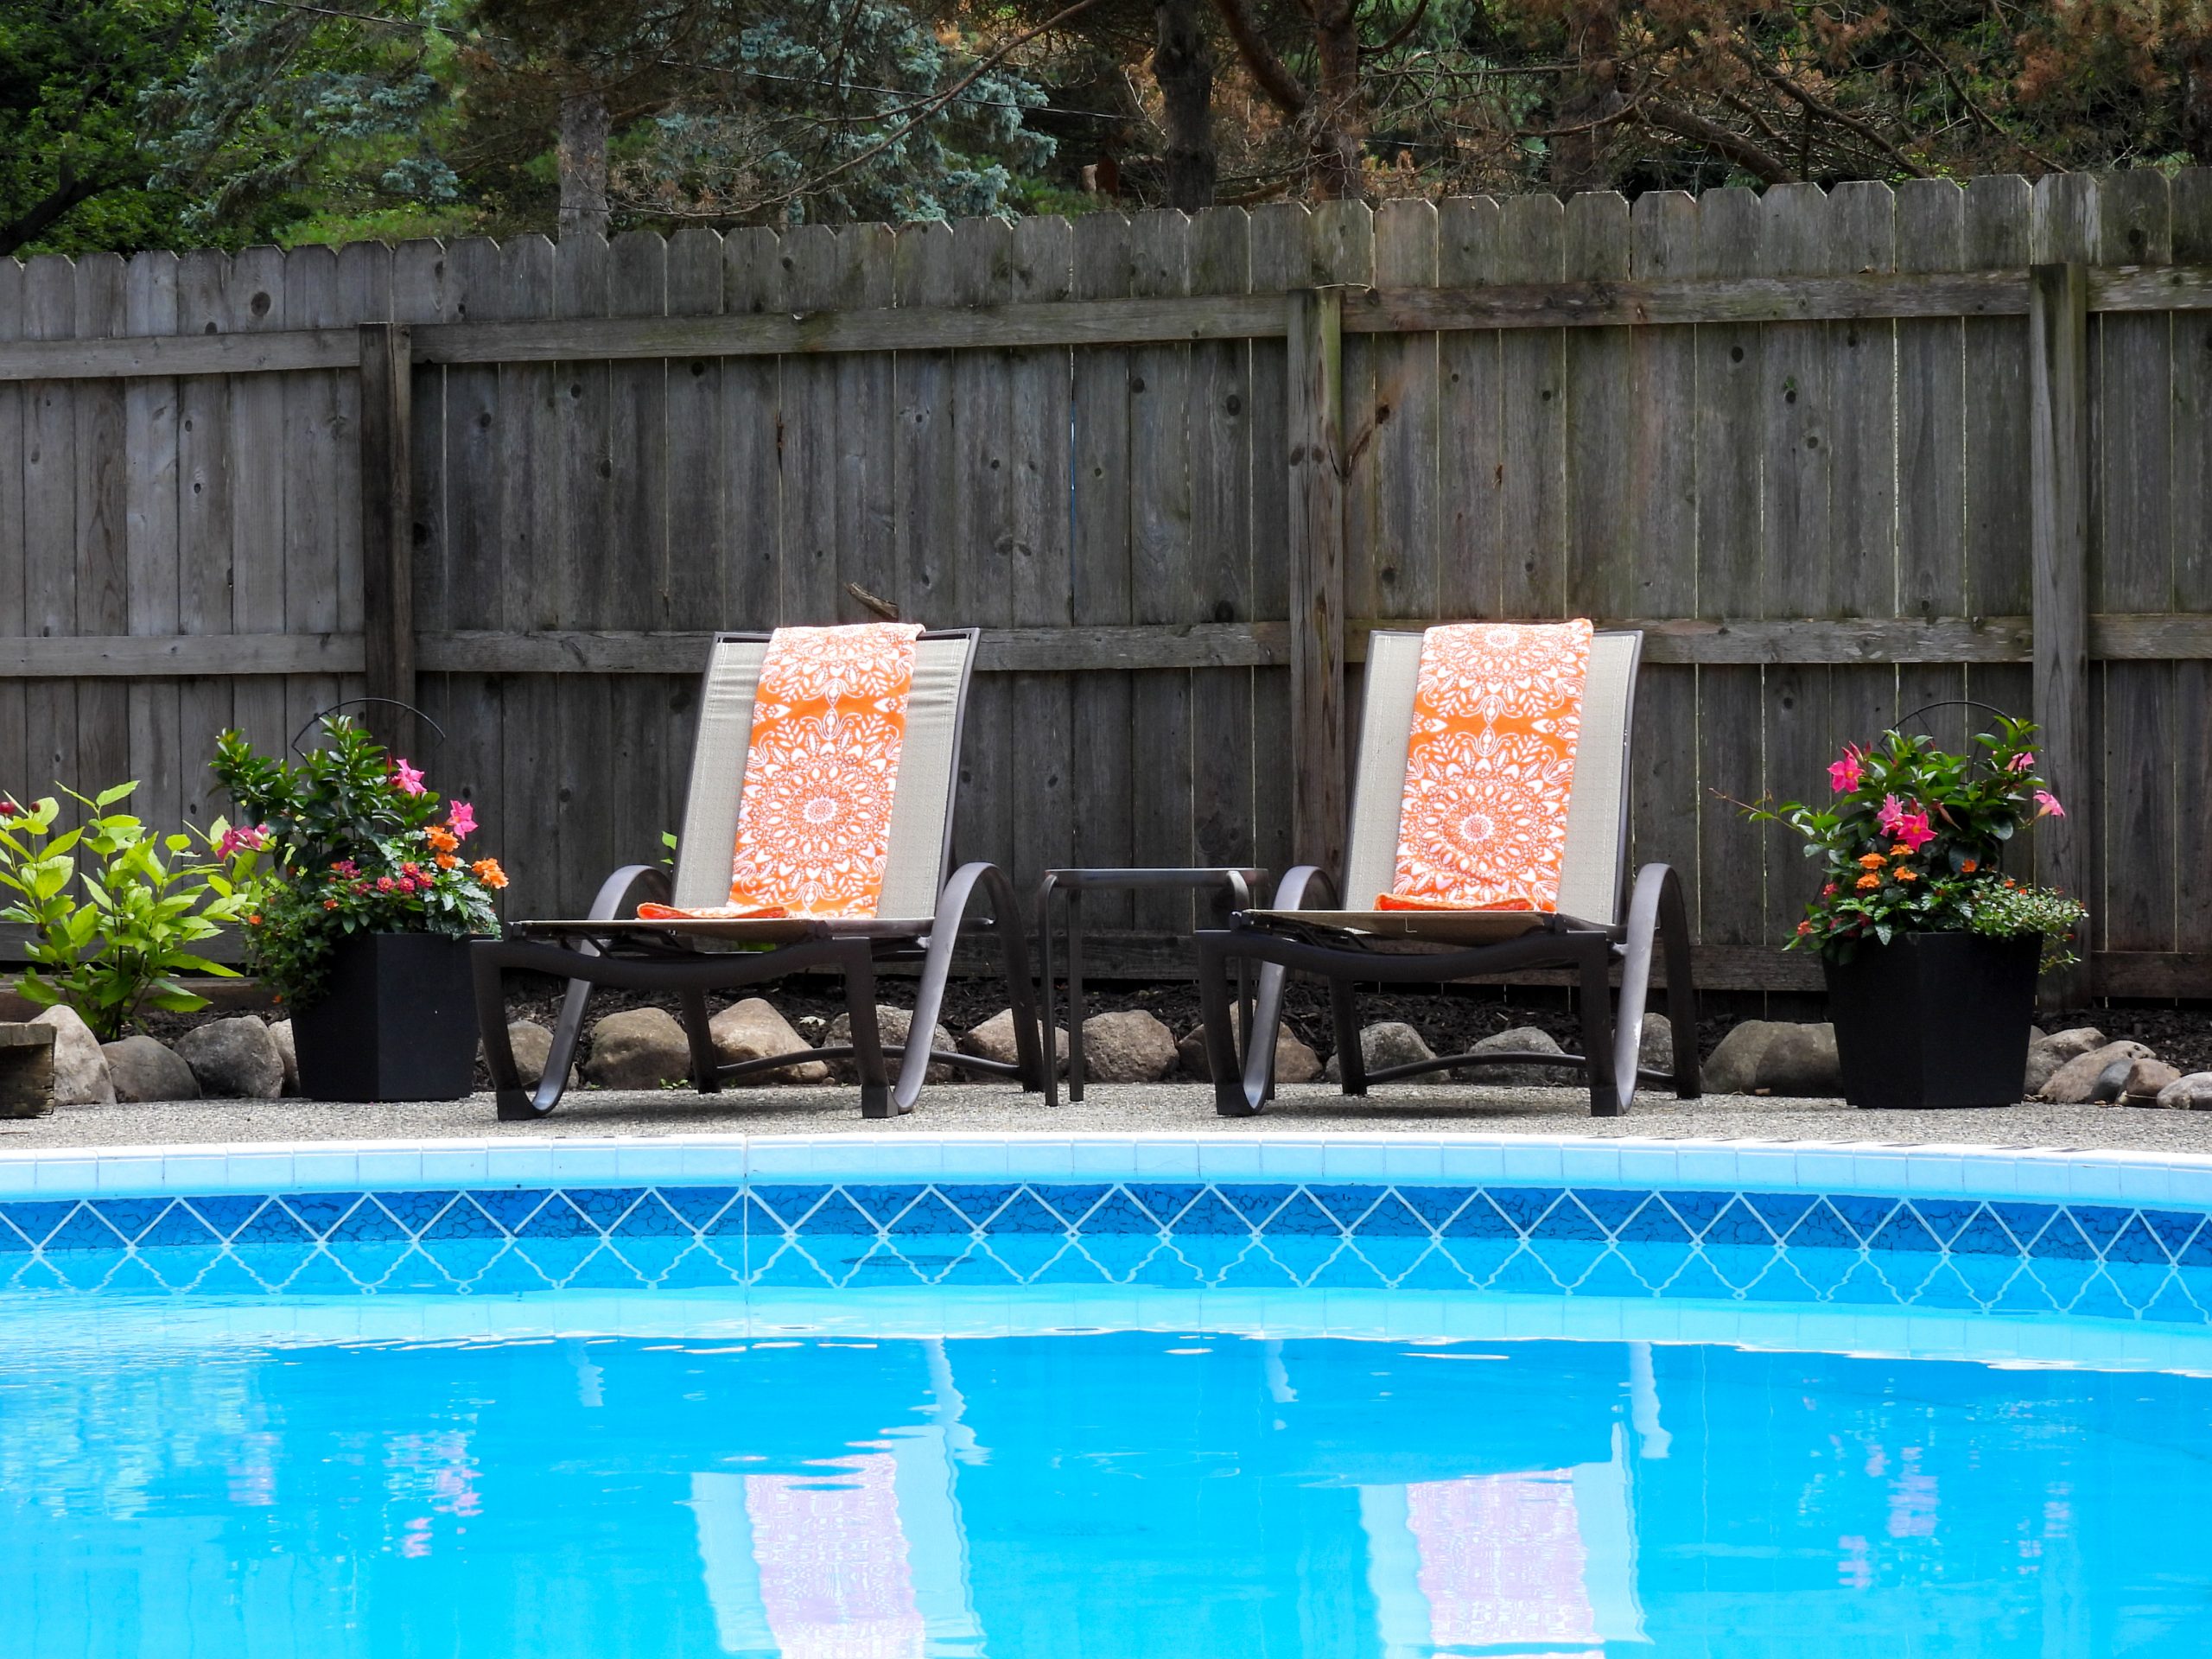 Brown fence with two outdoor lounge chairs in front of it. Chairs are next to a pool.